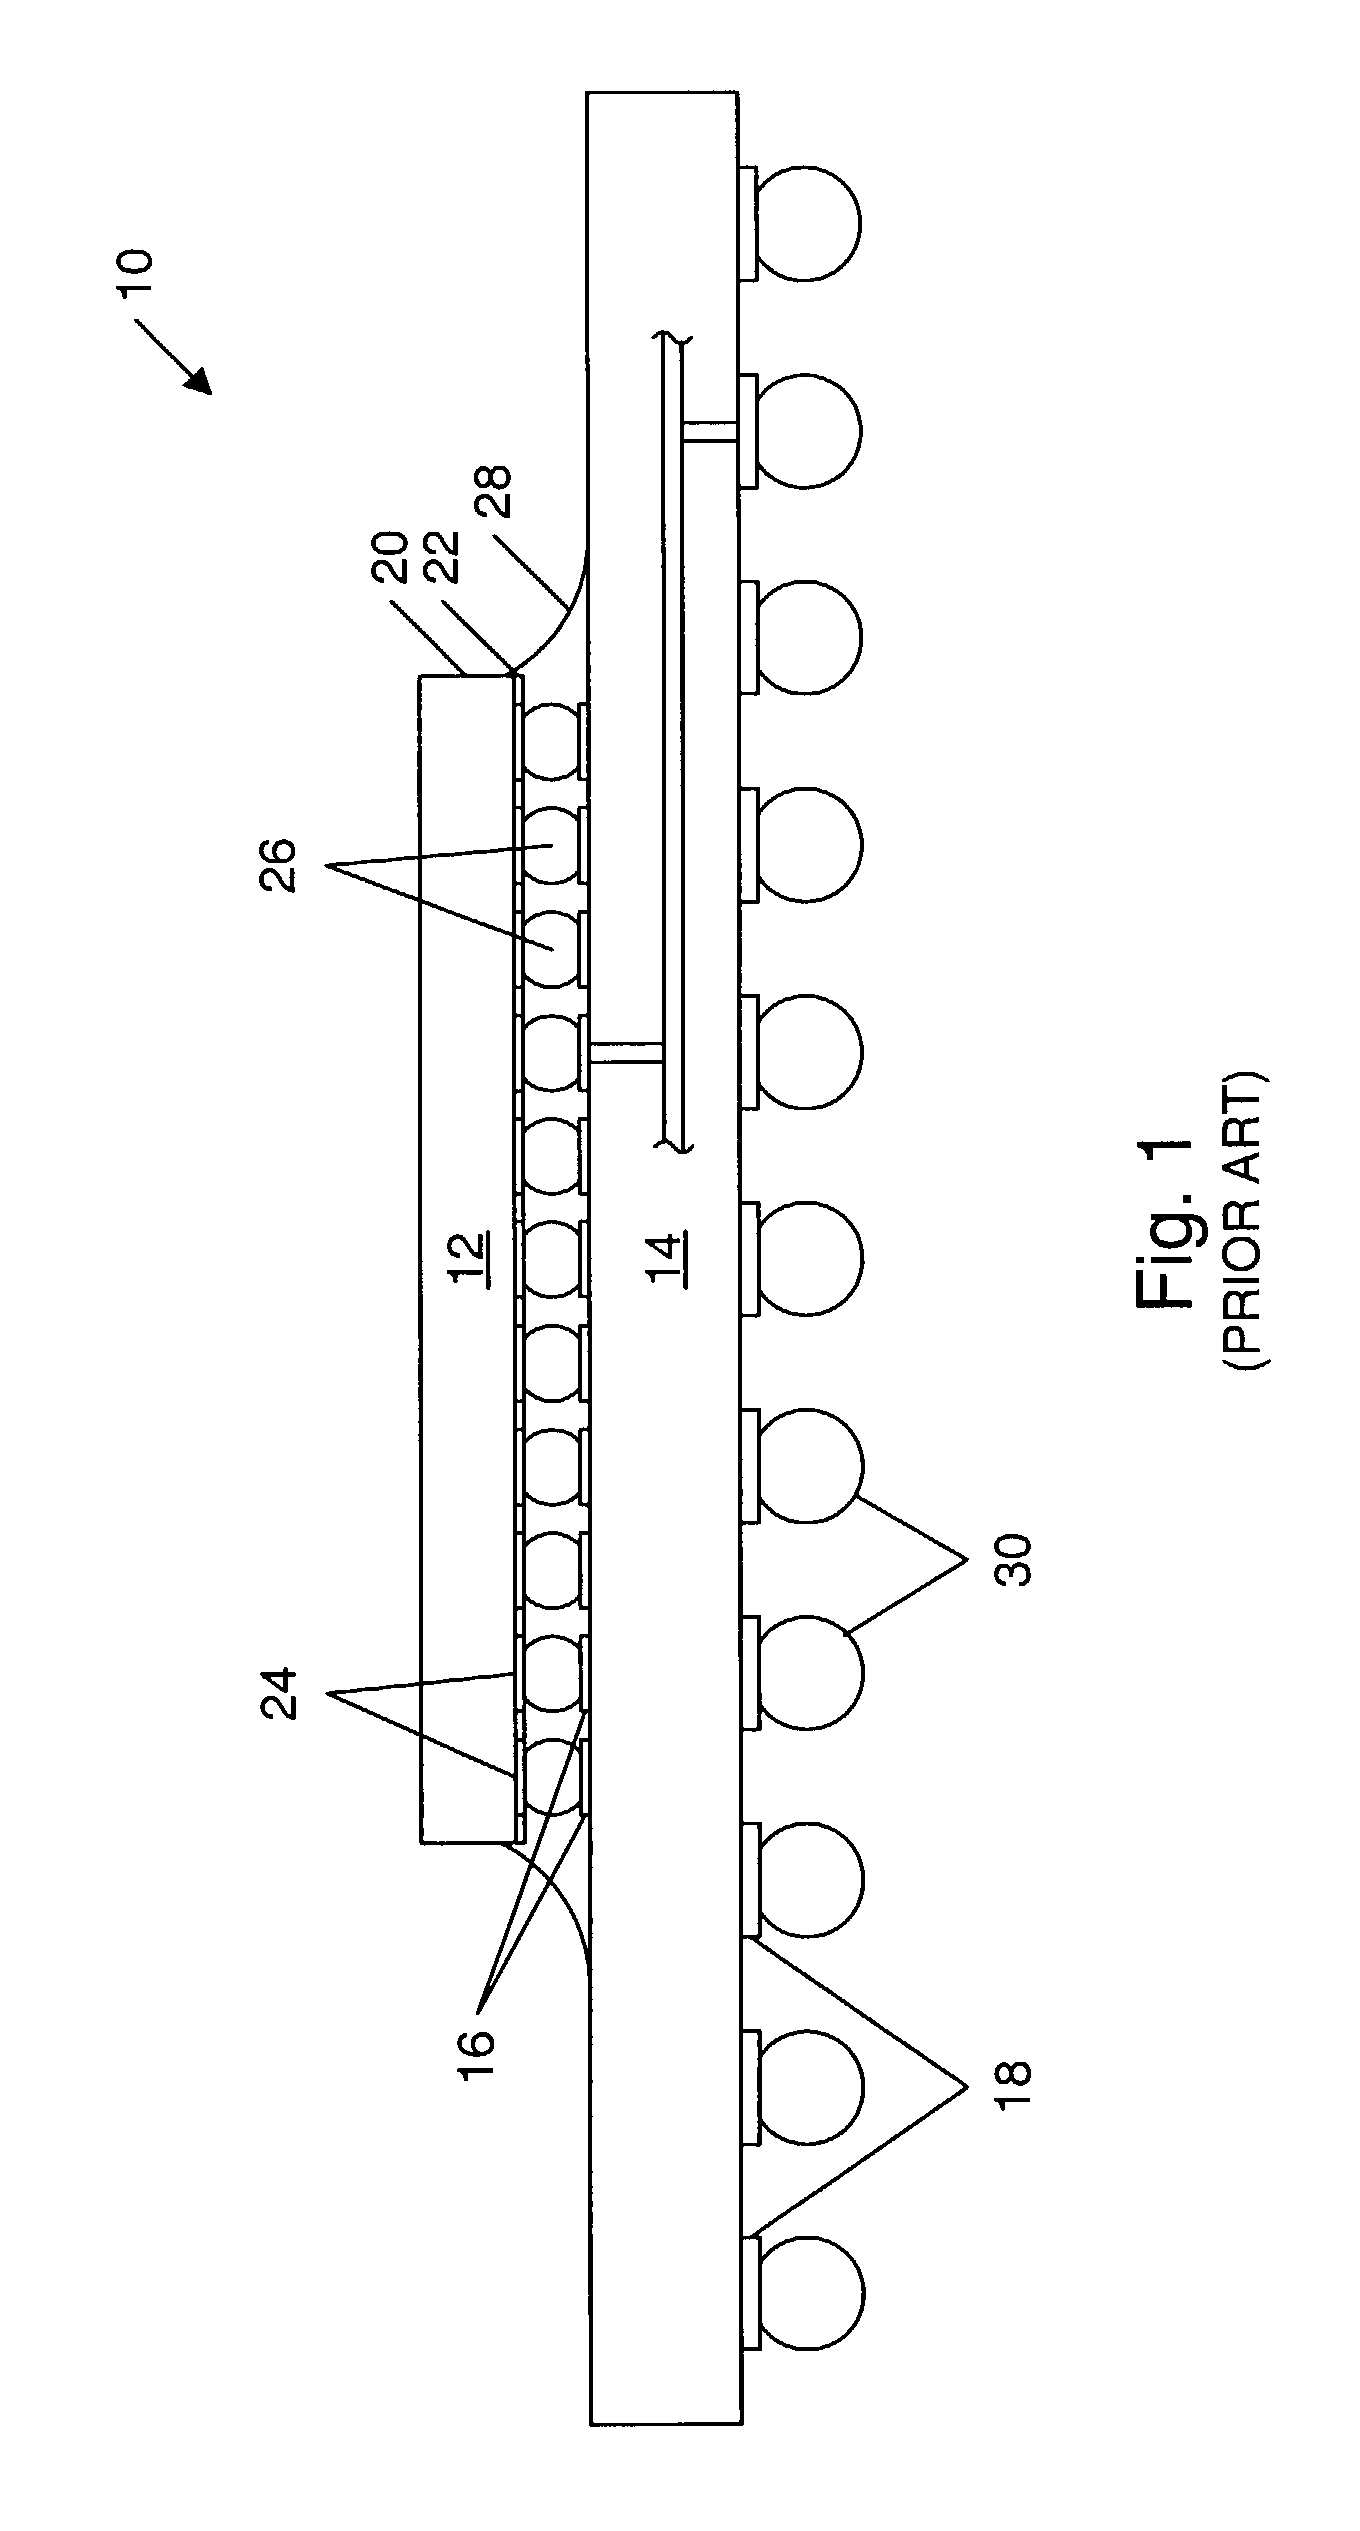 System and method for specifying integrated circuit probe locations